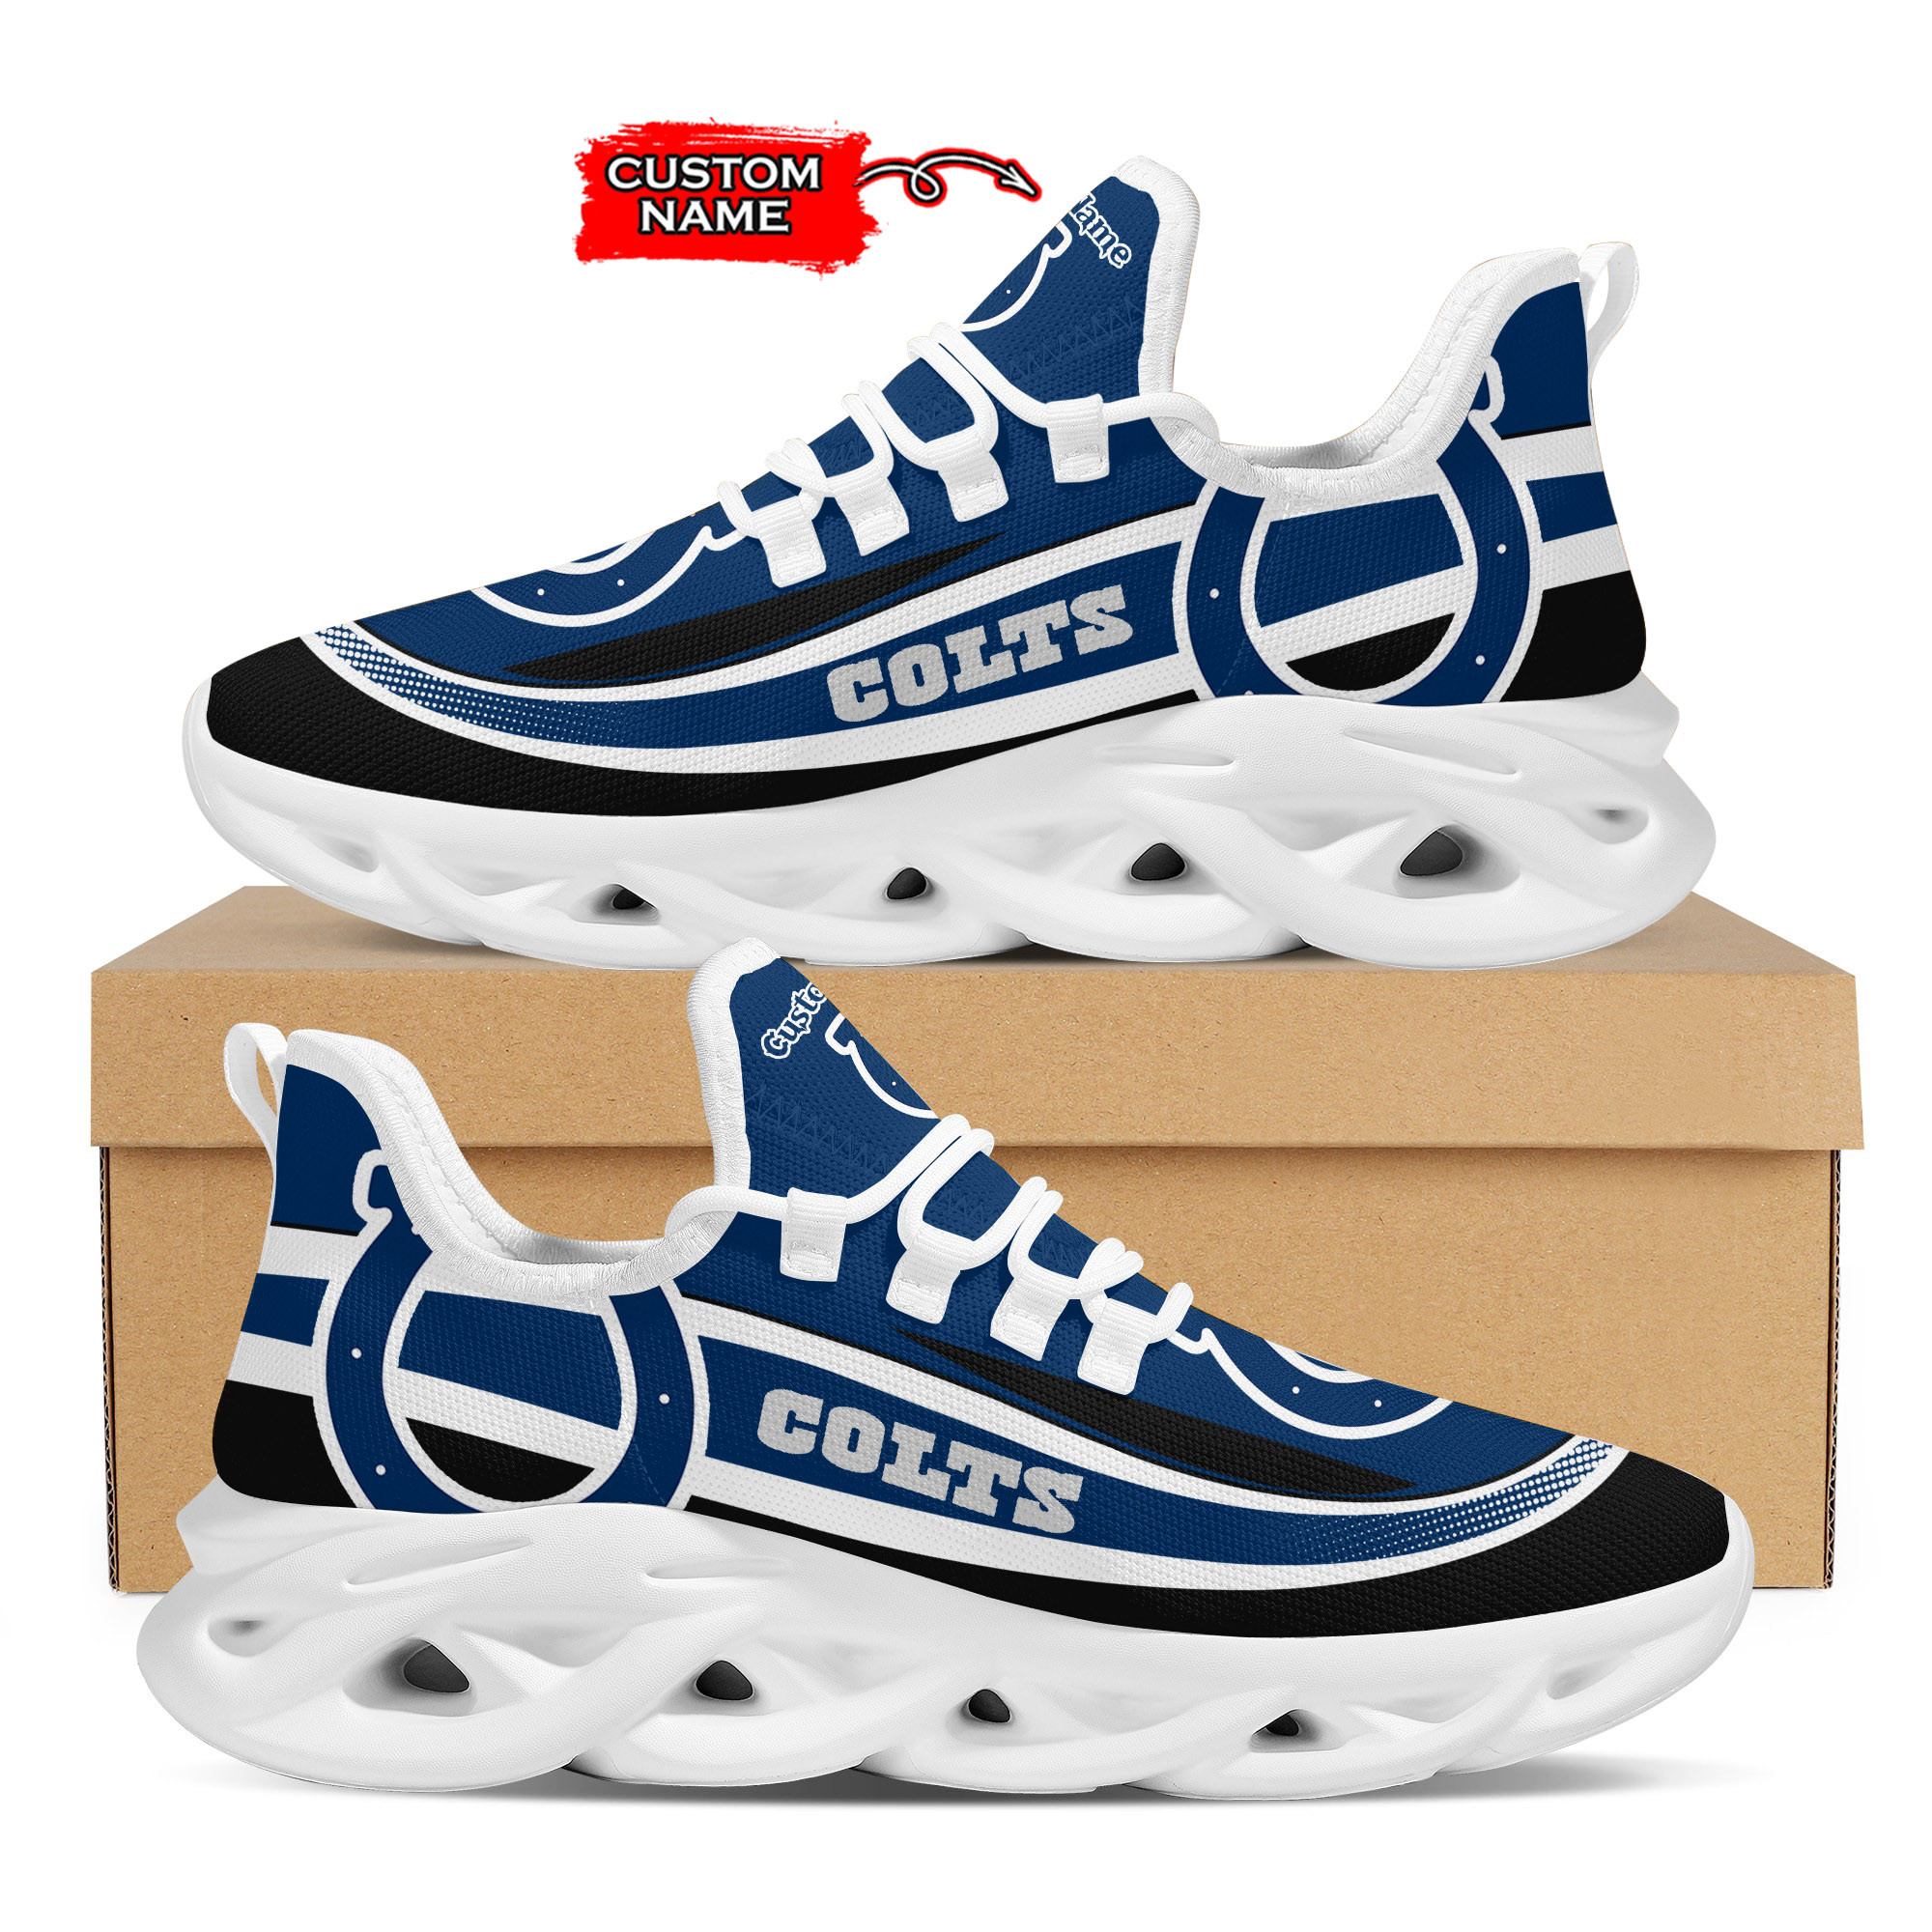 Indianapolis Colts Nfl Custom Name Clunky Max Soul Shoes Sneakers For Mens Womens Personalized Gifts